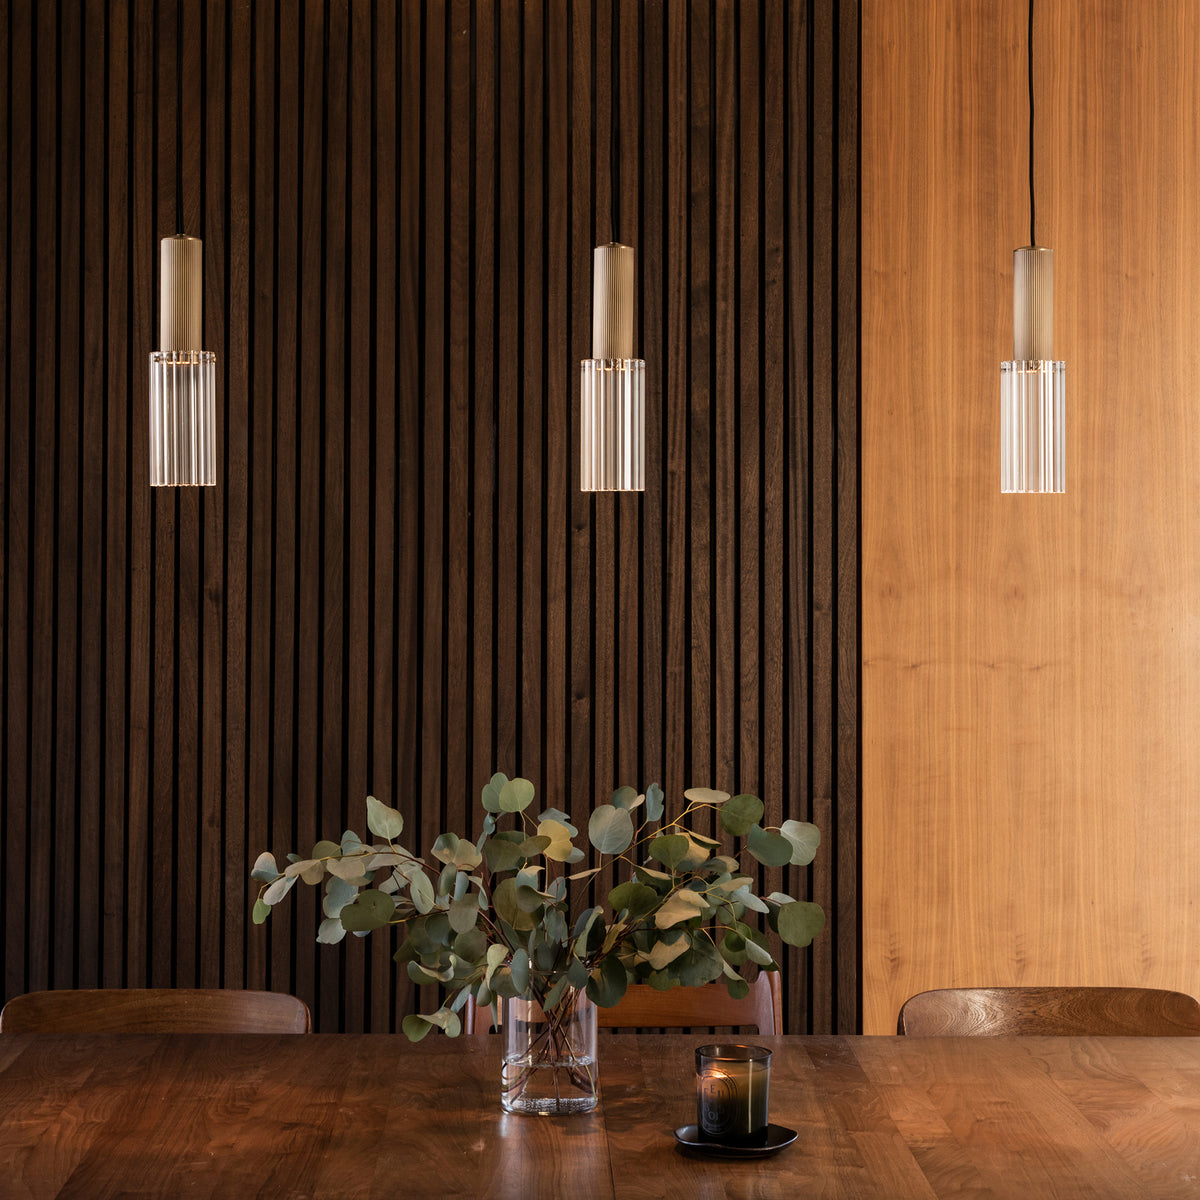 Three Flume 80 Pendant Lights in antique brass with clear reeded glass suspended above wooden dining table